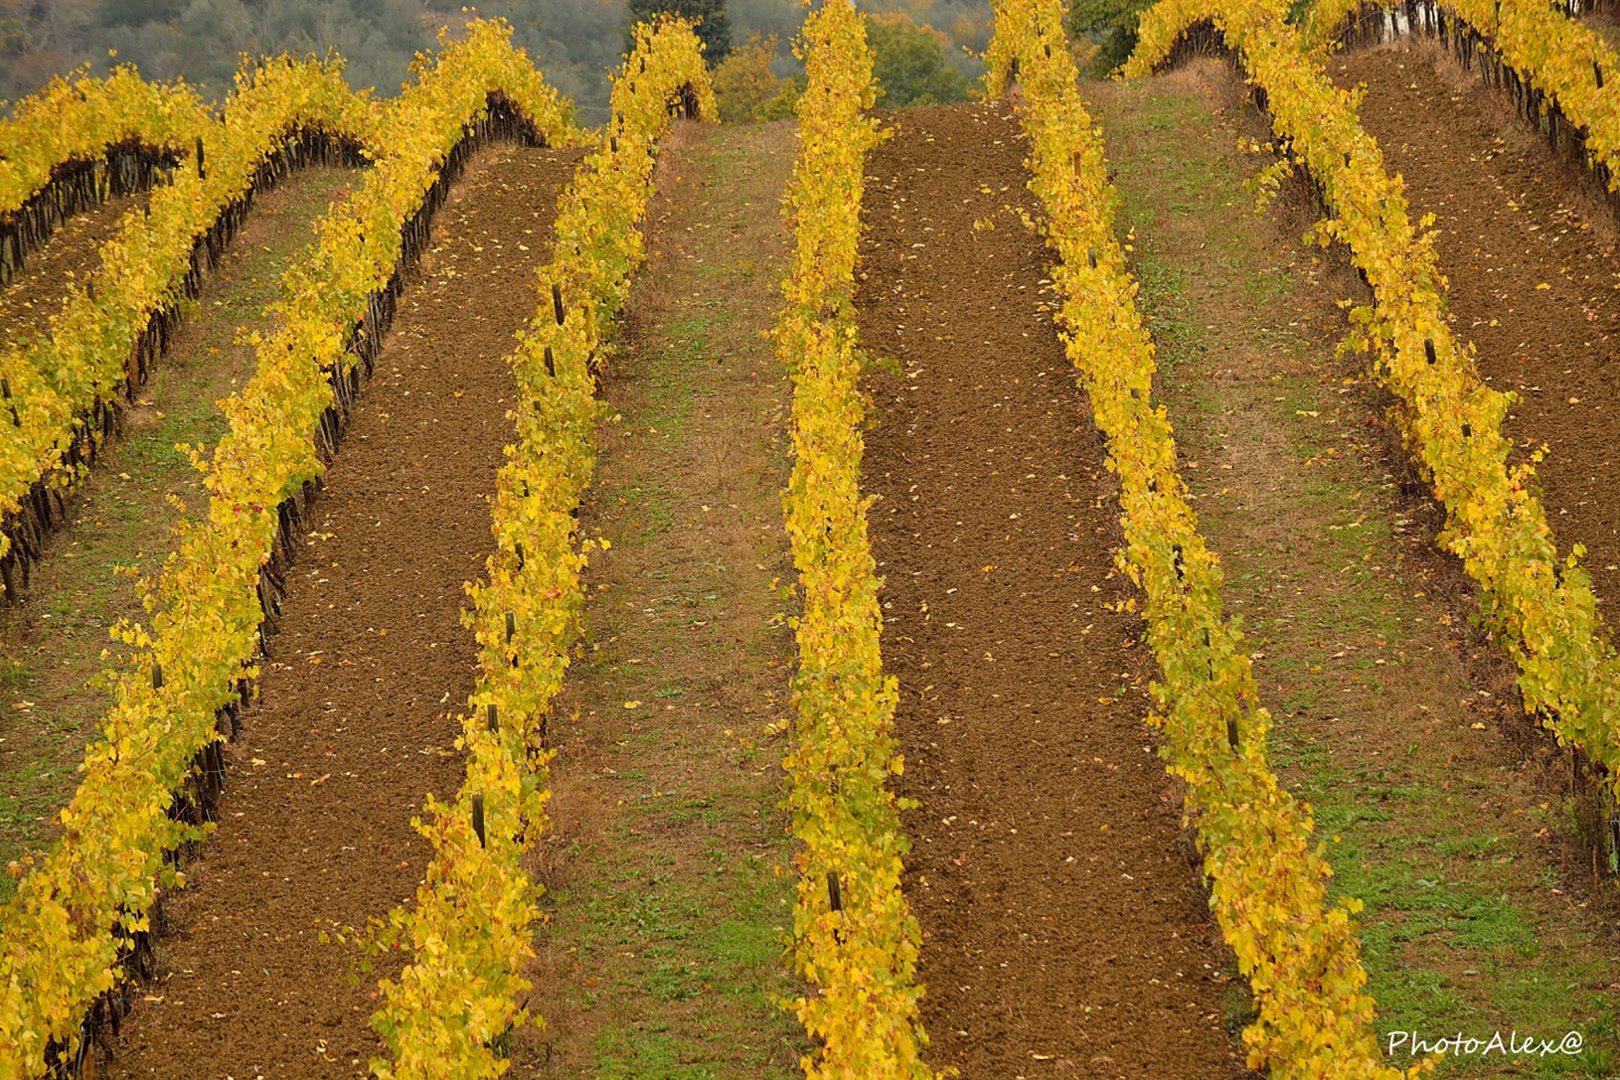 Fall is a wonderful time to visit, when the leaves turn golden in the surrounding vineyards.